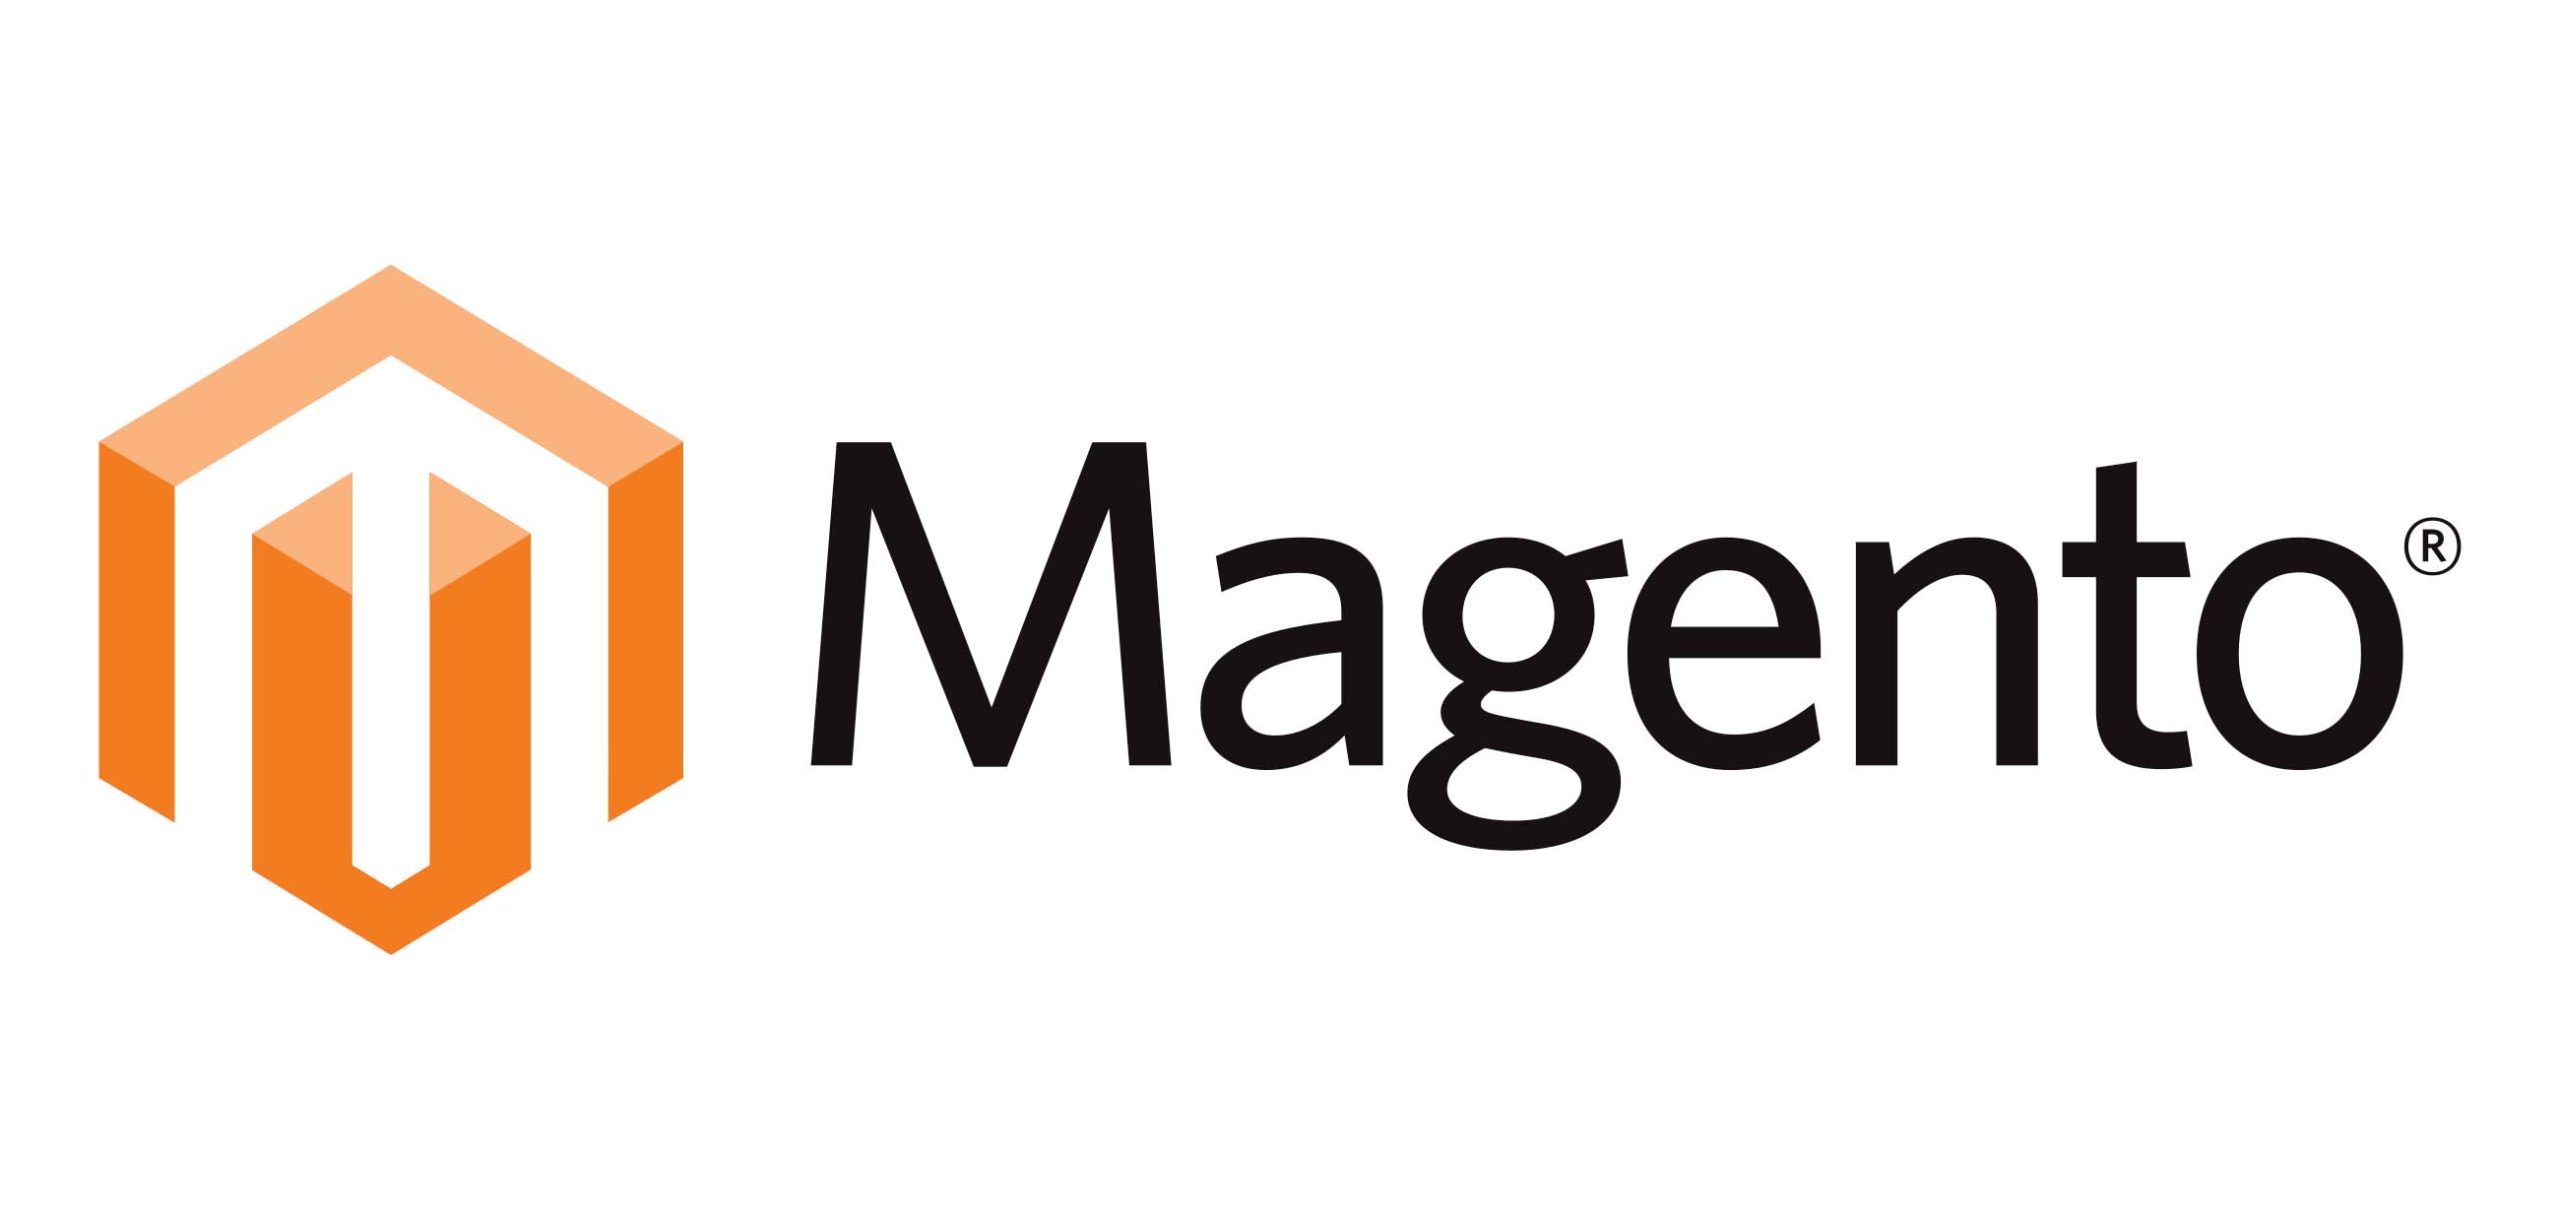 https://woohoopay.ie/wp-content/uploads/2022/10/Magento-logo2-1-scaled-1.jpg